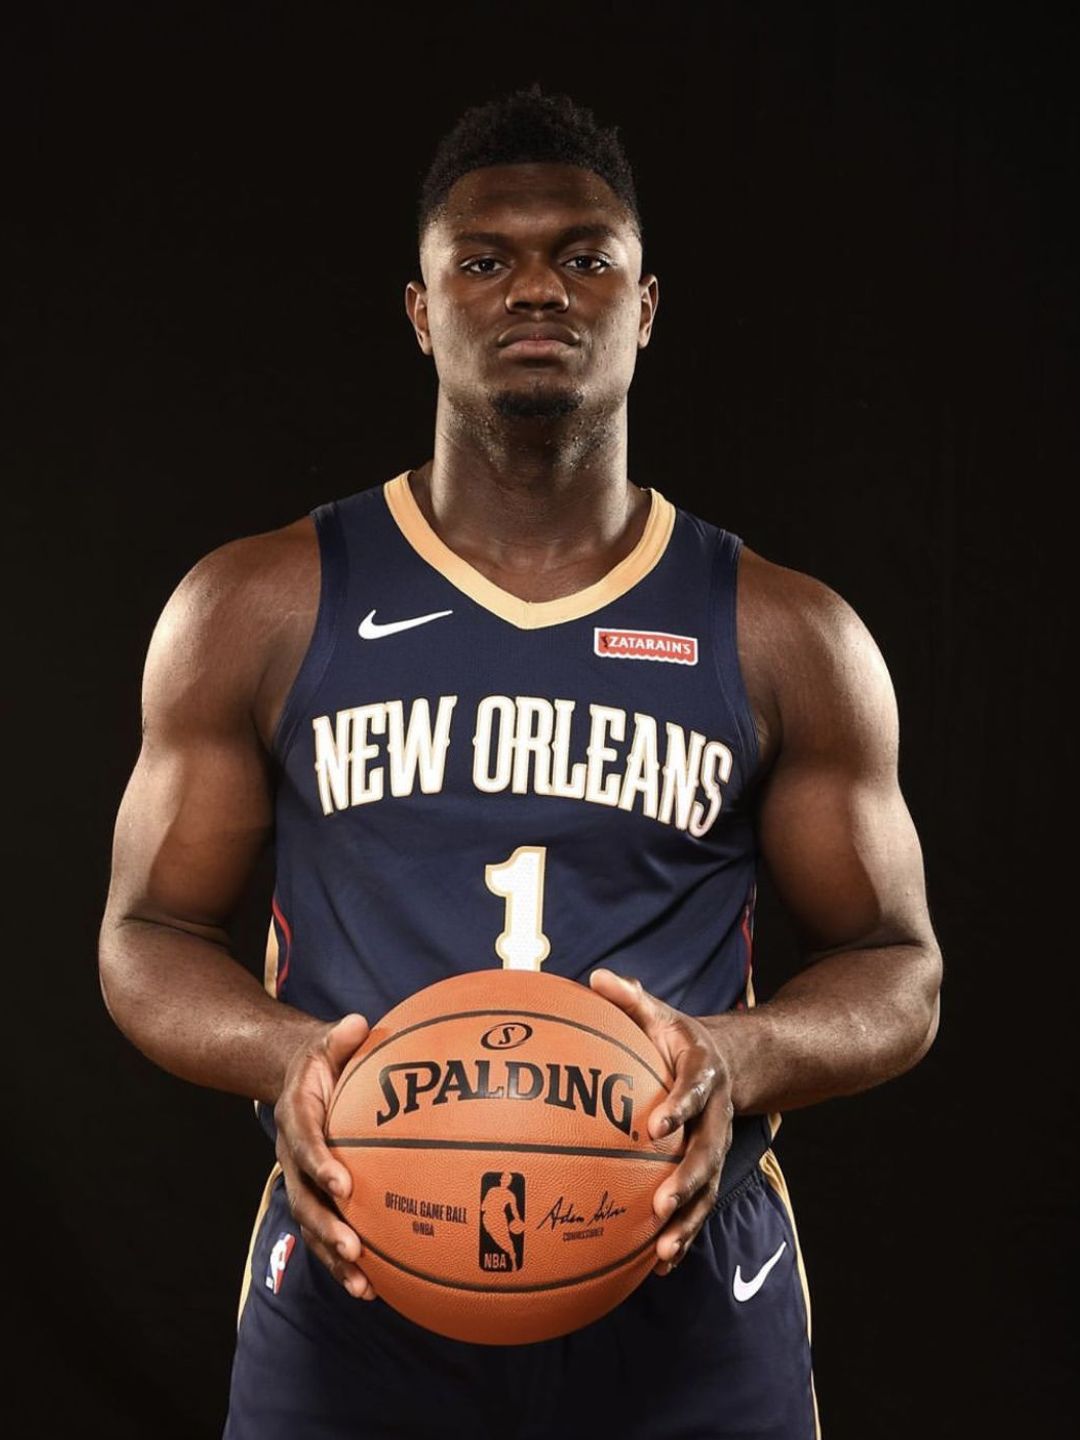 Zion Williamson who is he